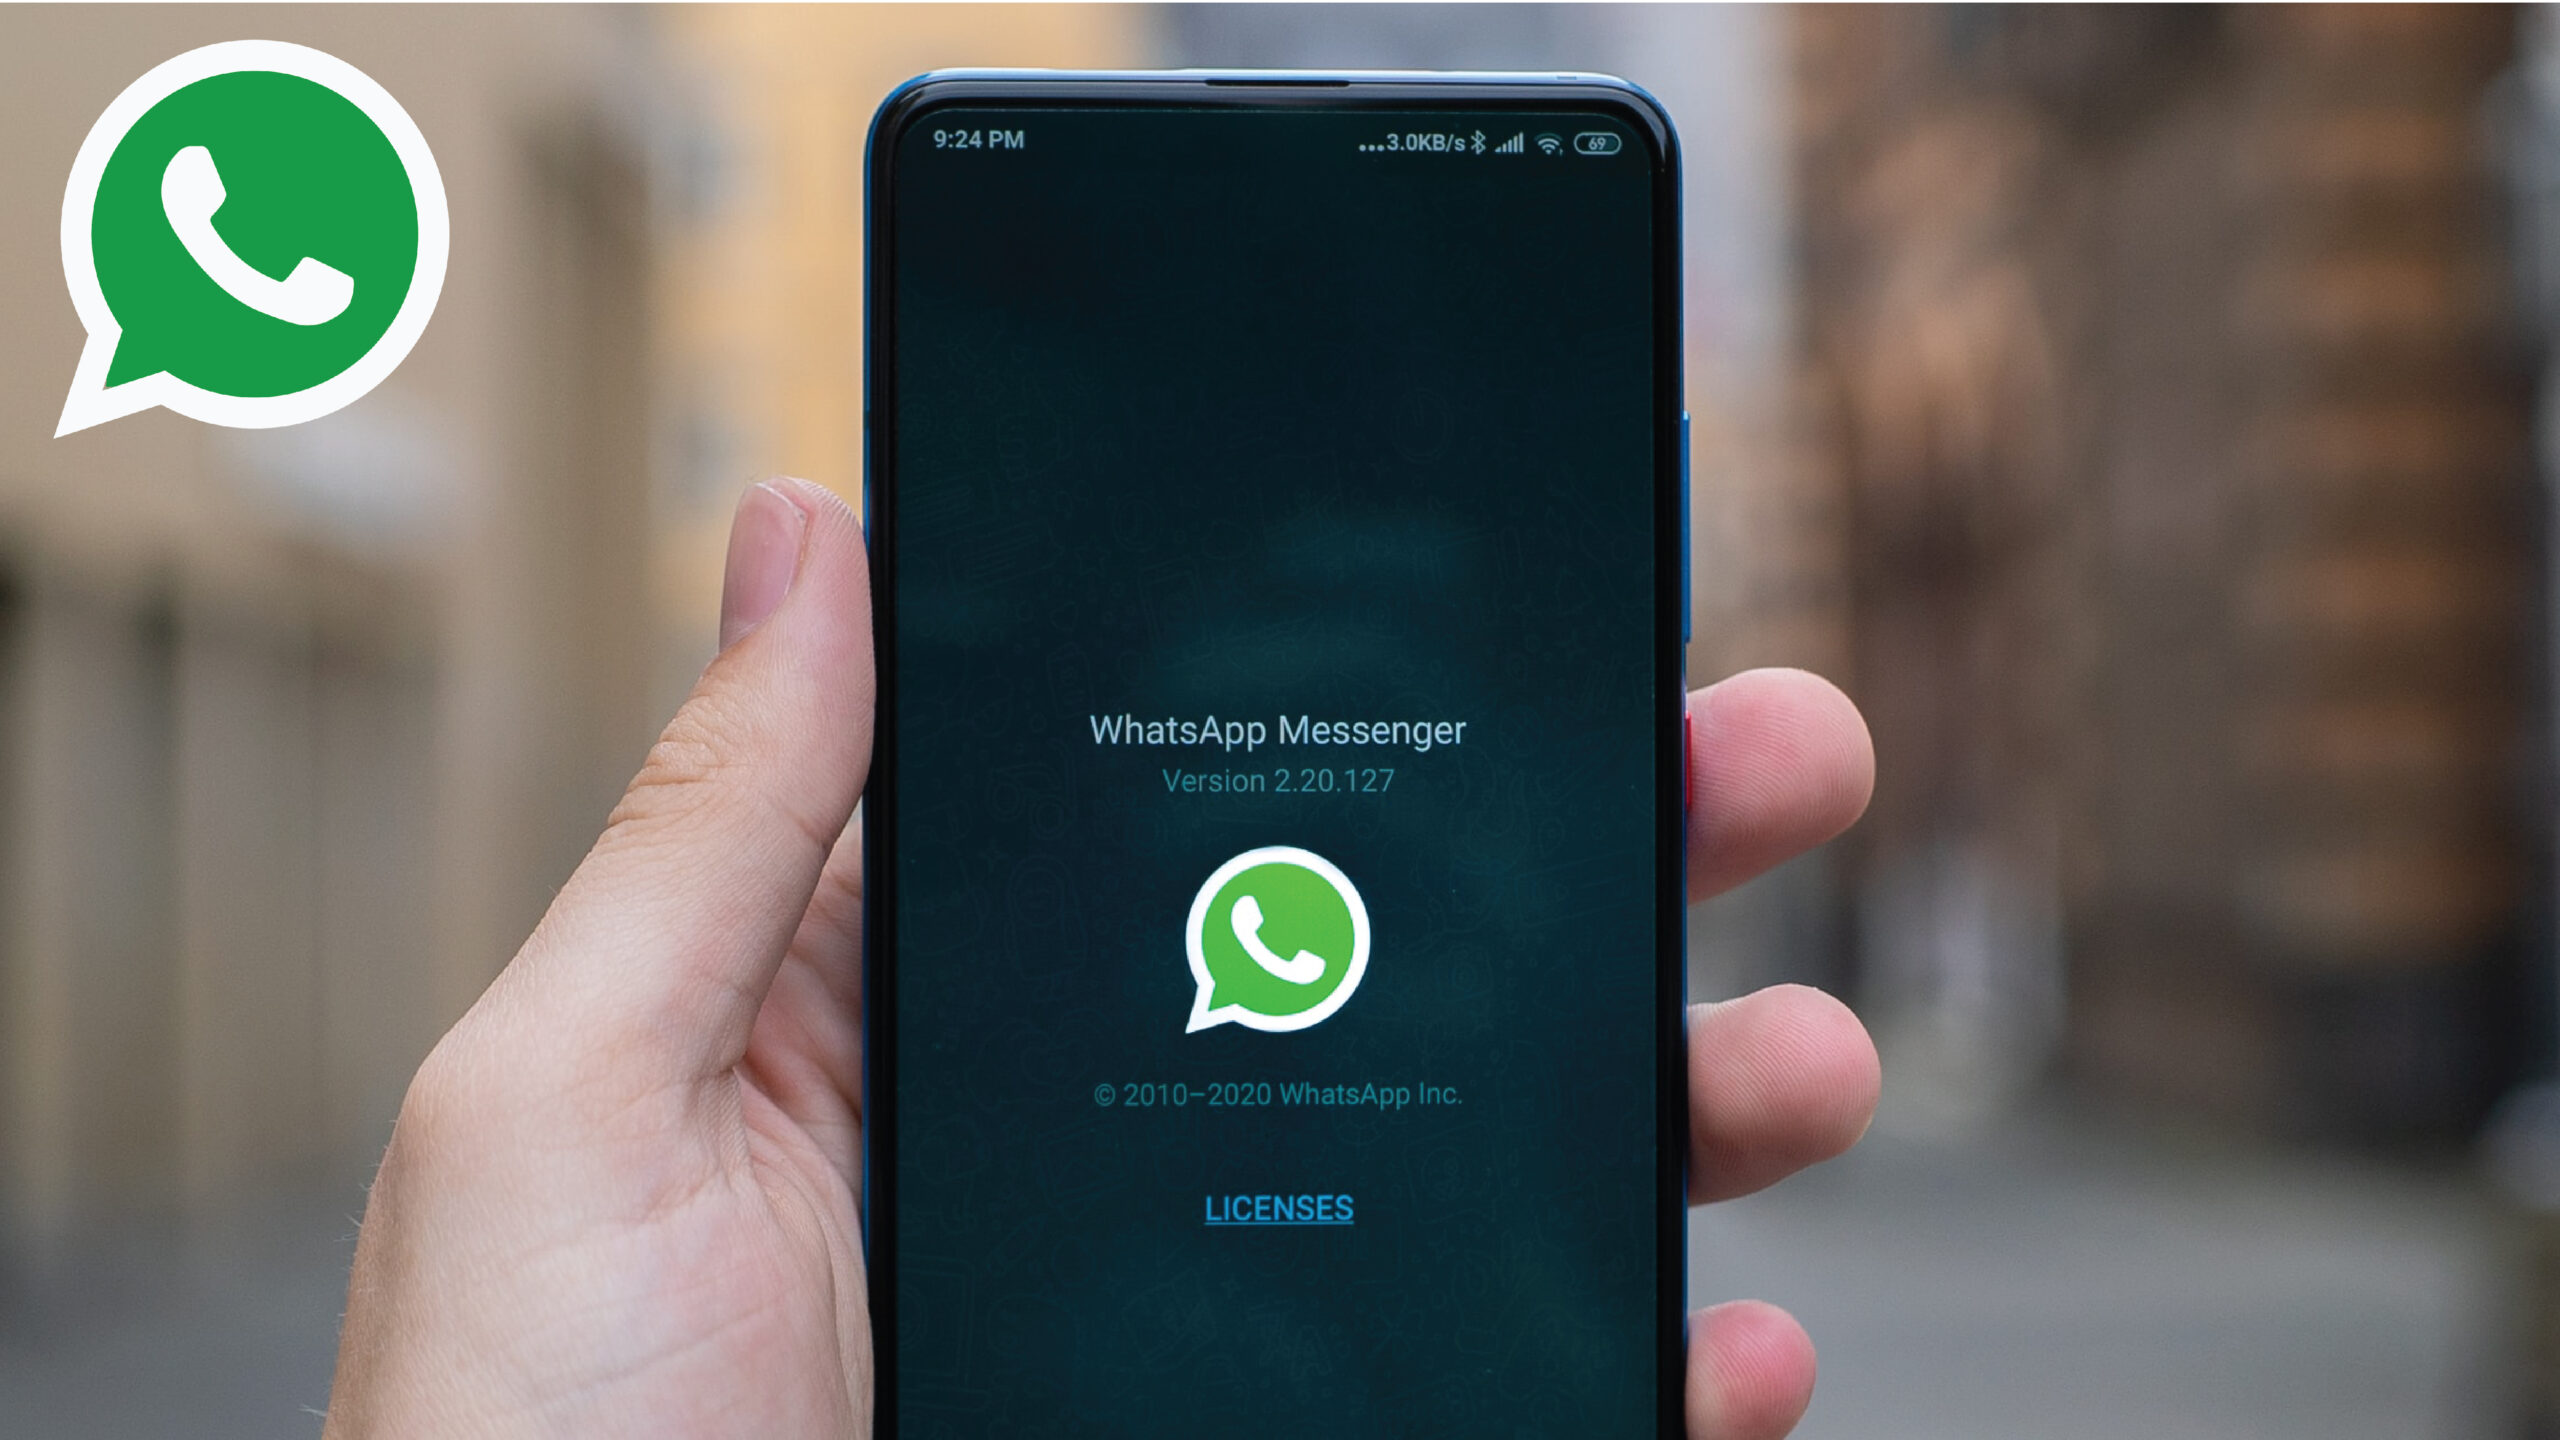 WhatsApp finally rolls out view once feature